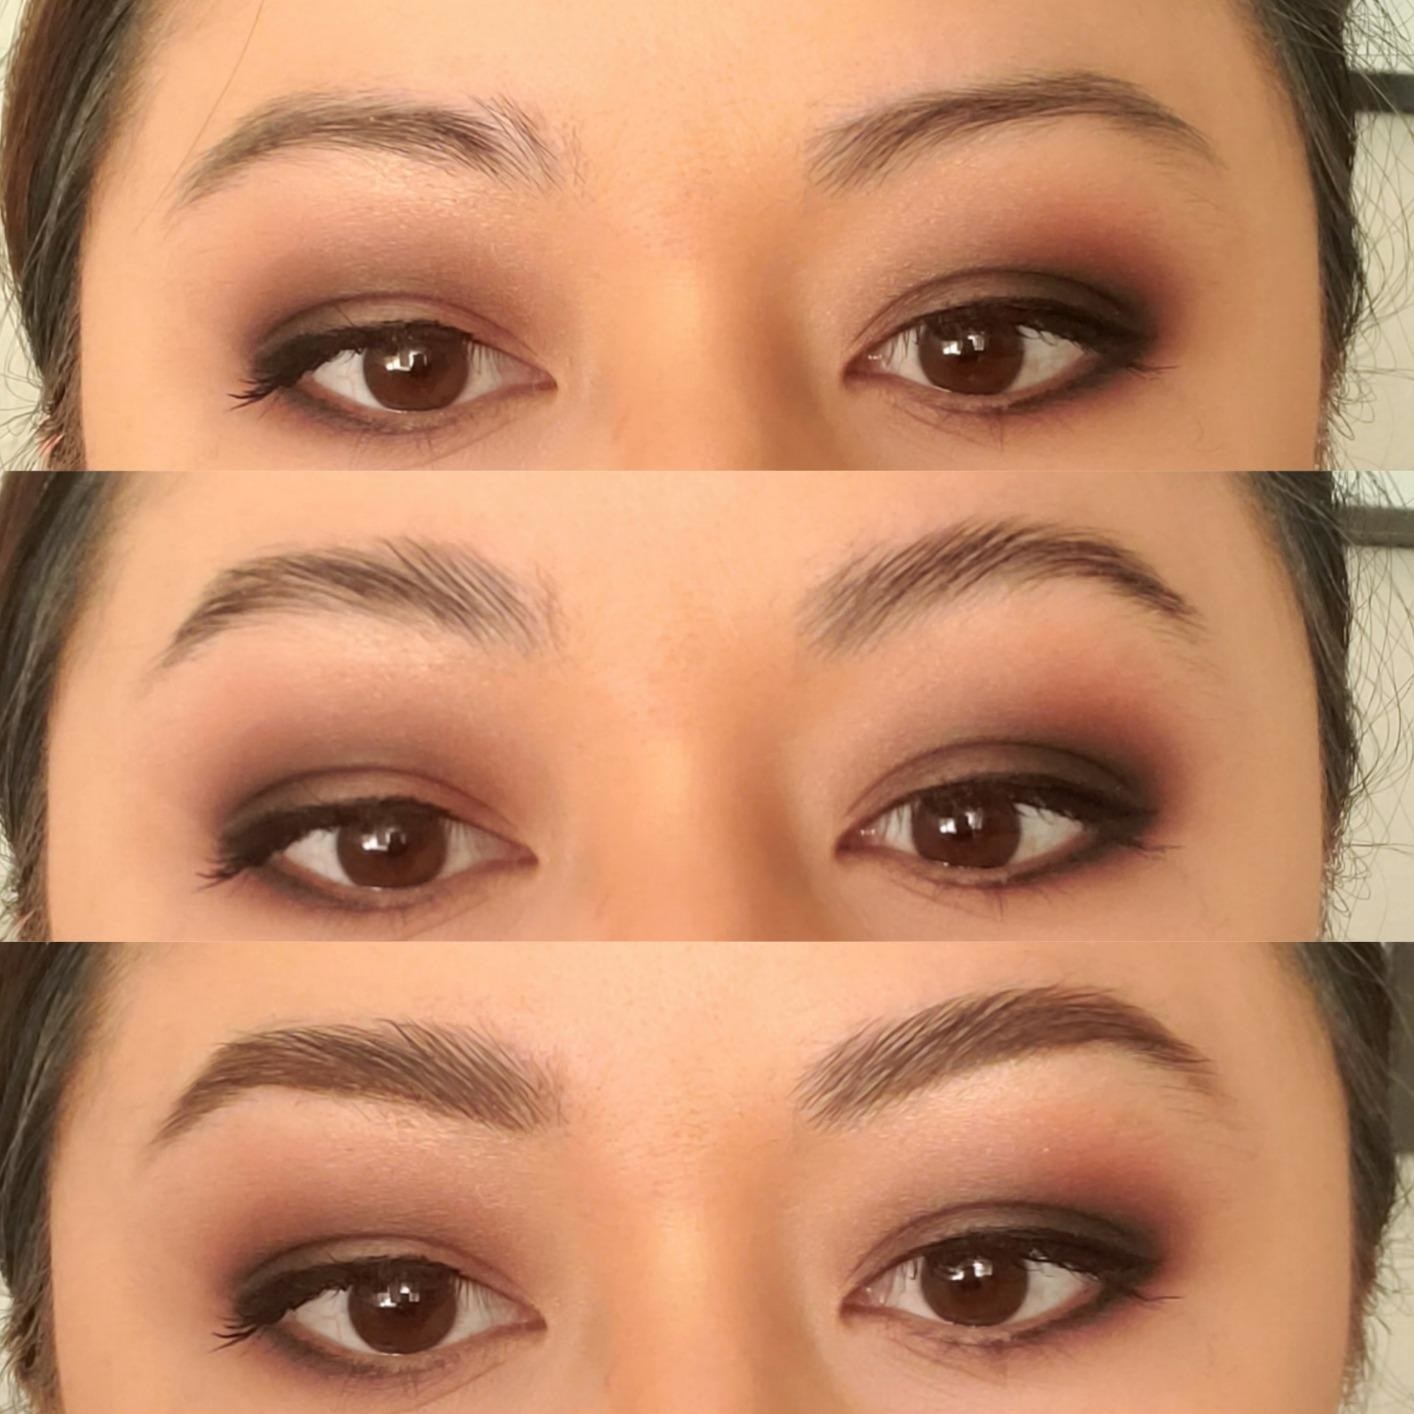 Progression photo showing reviewer's natural brows, the brows with the soap applied, and the brows with soap and powder applied